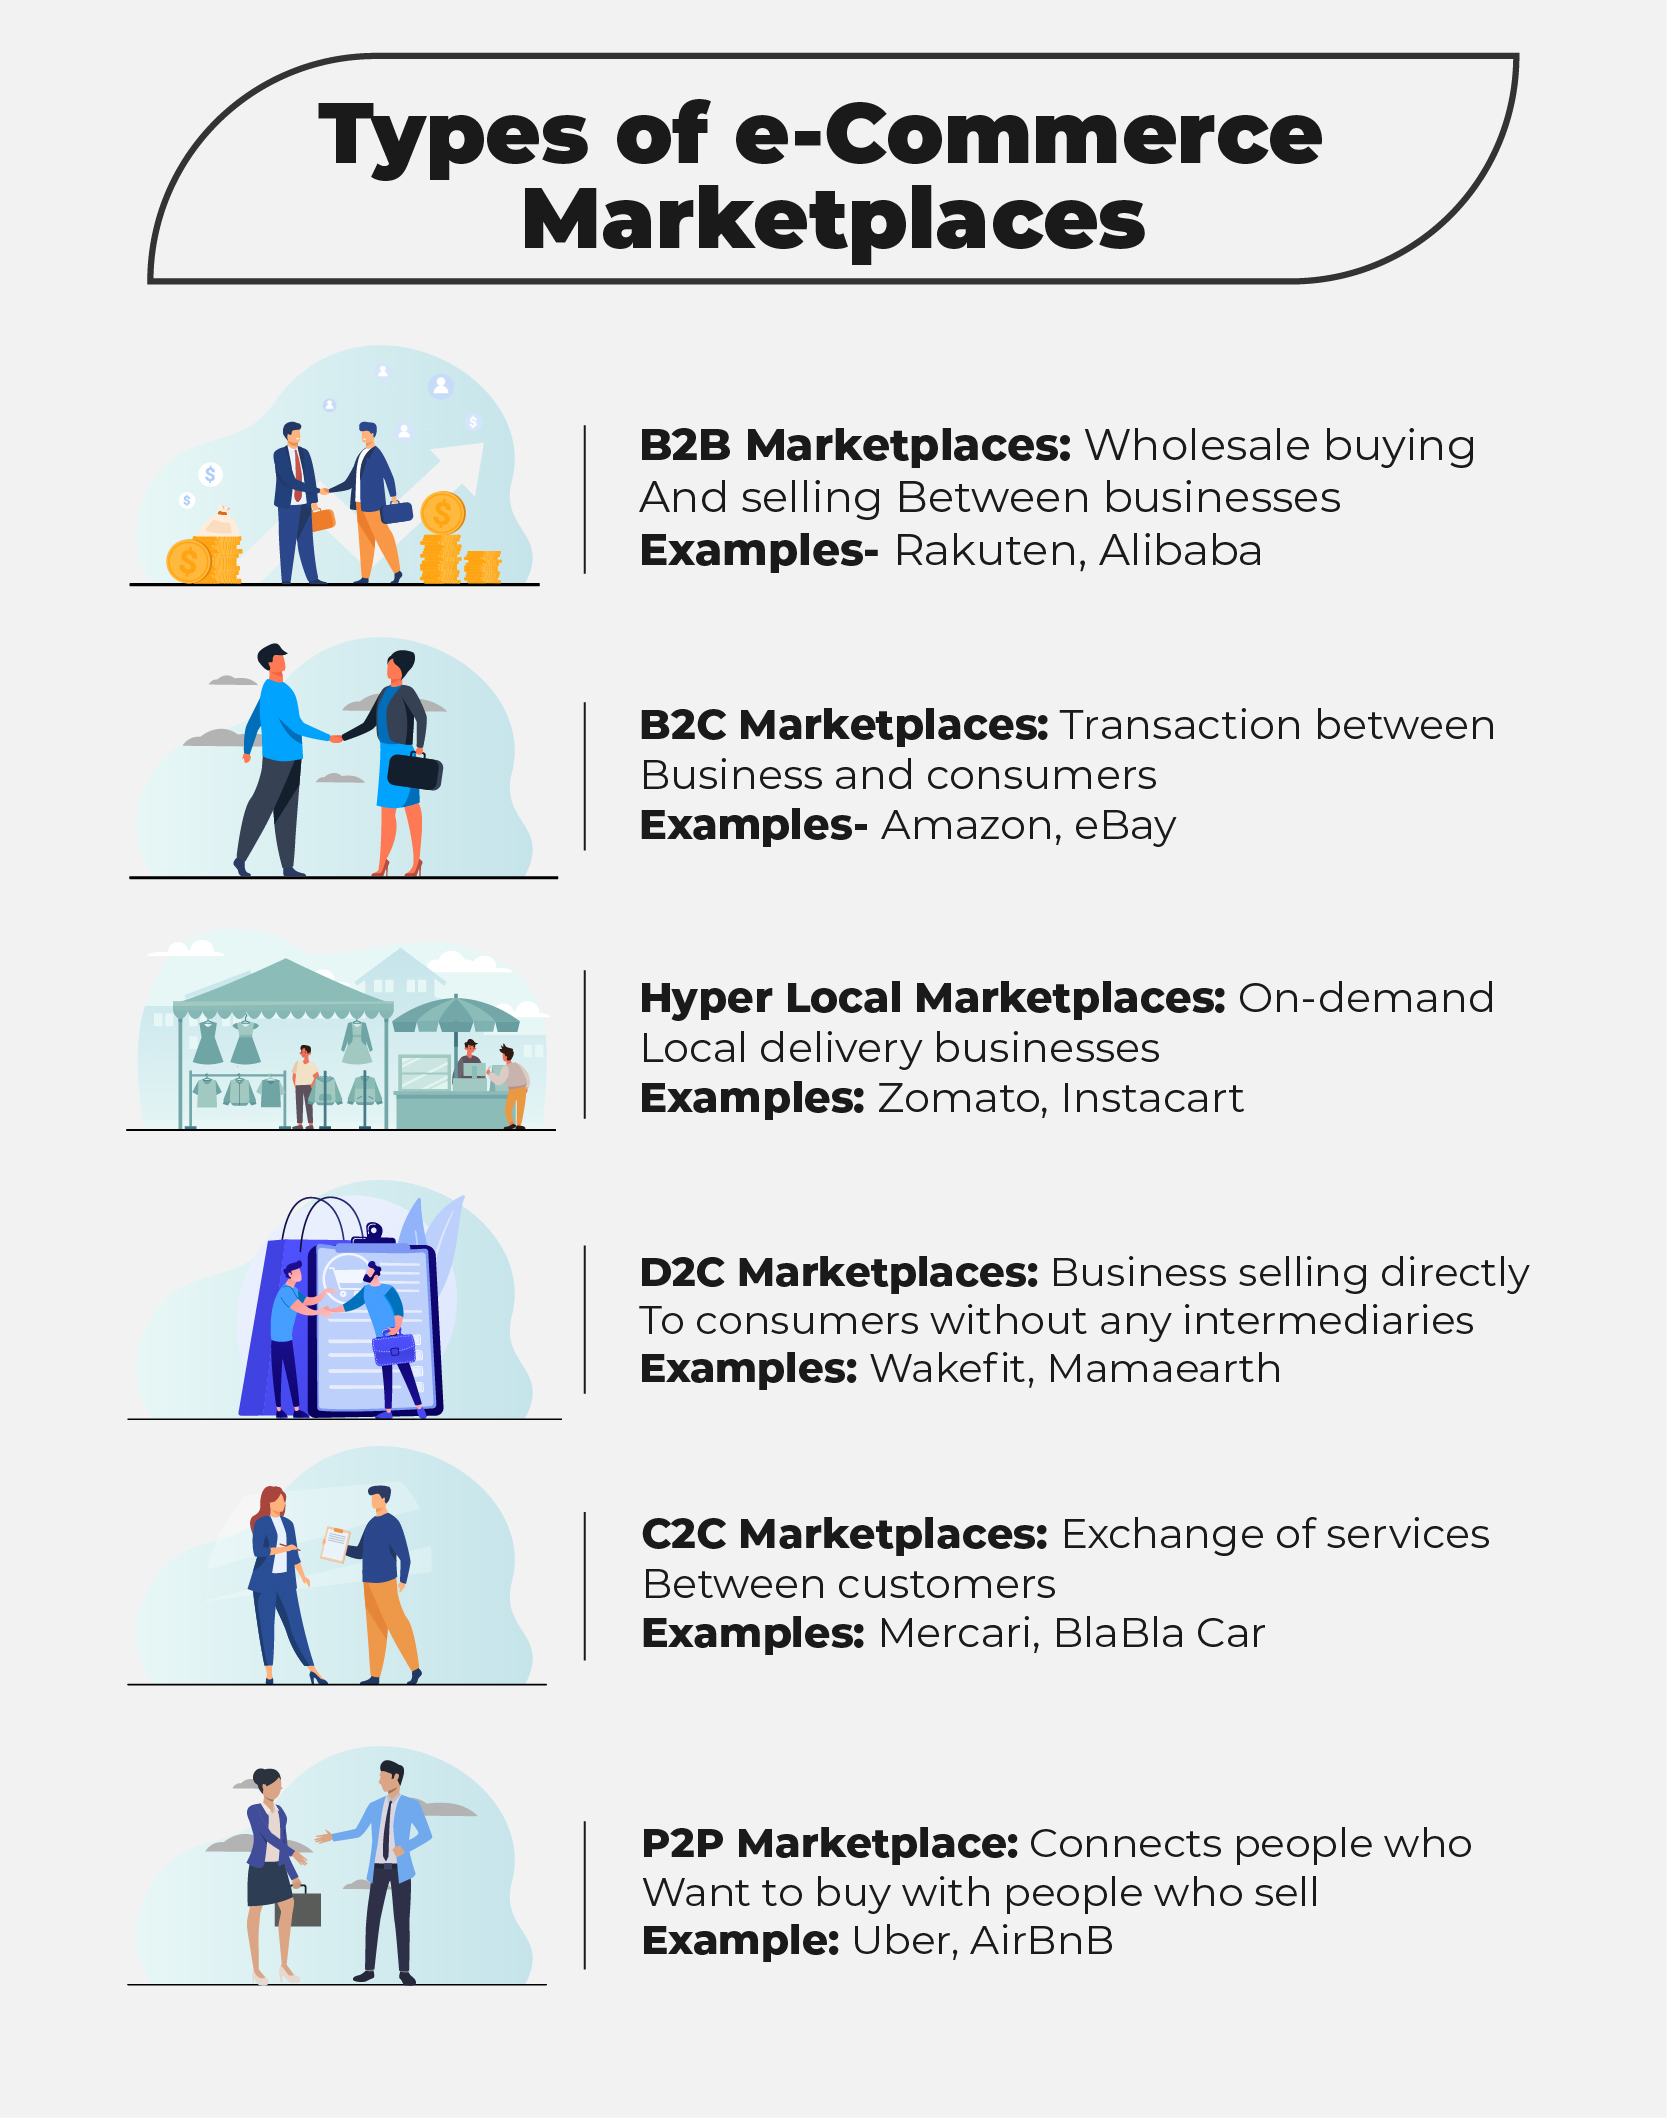 Types of online marketplaces